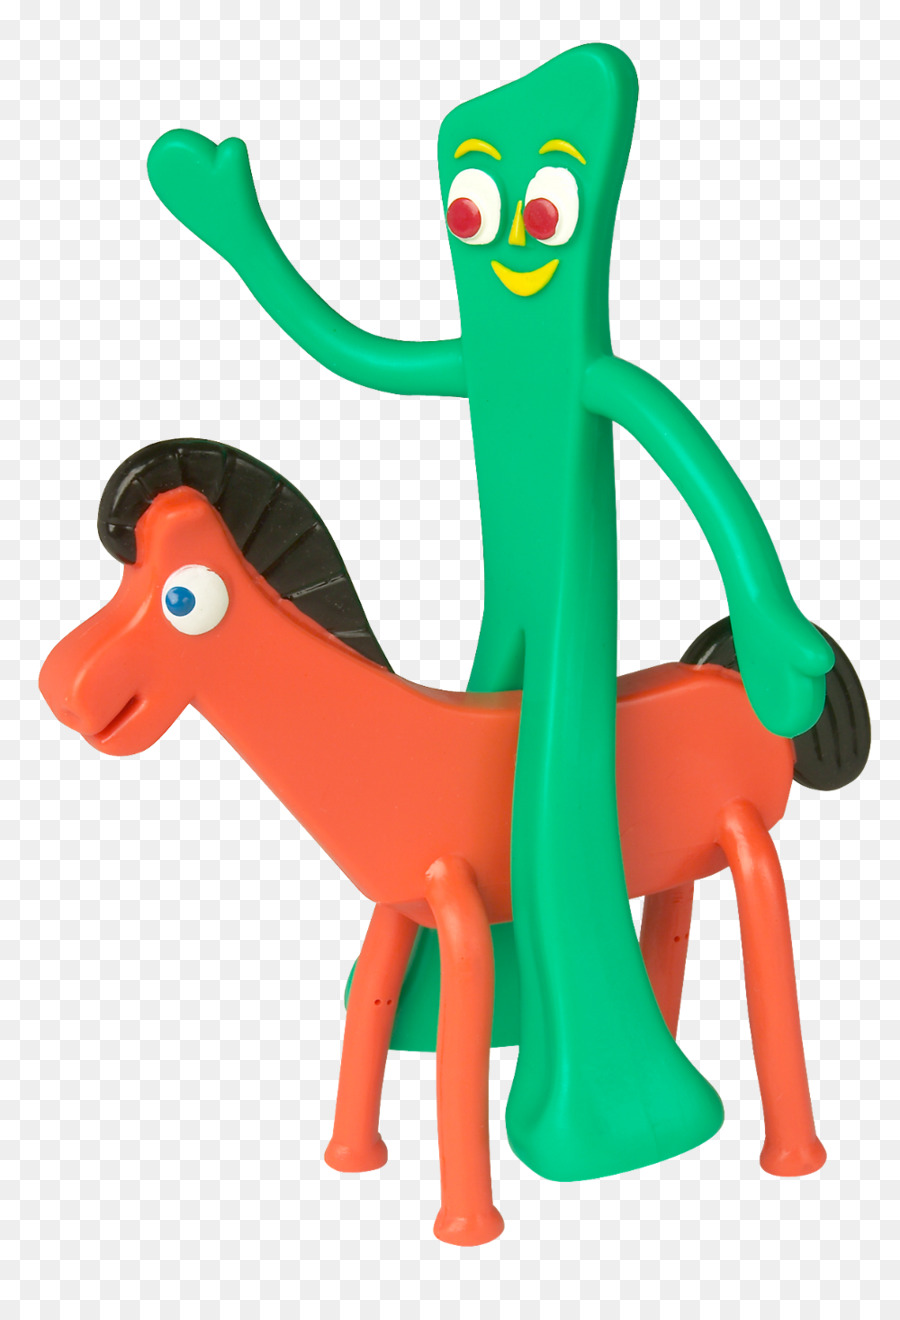 Gumby, Pokey, Animation, Television Show, Character, Toy, Clay Animation, S...